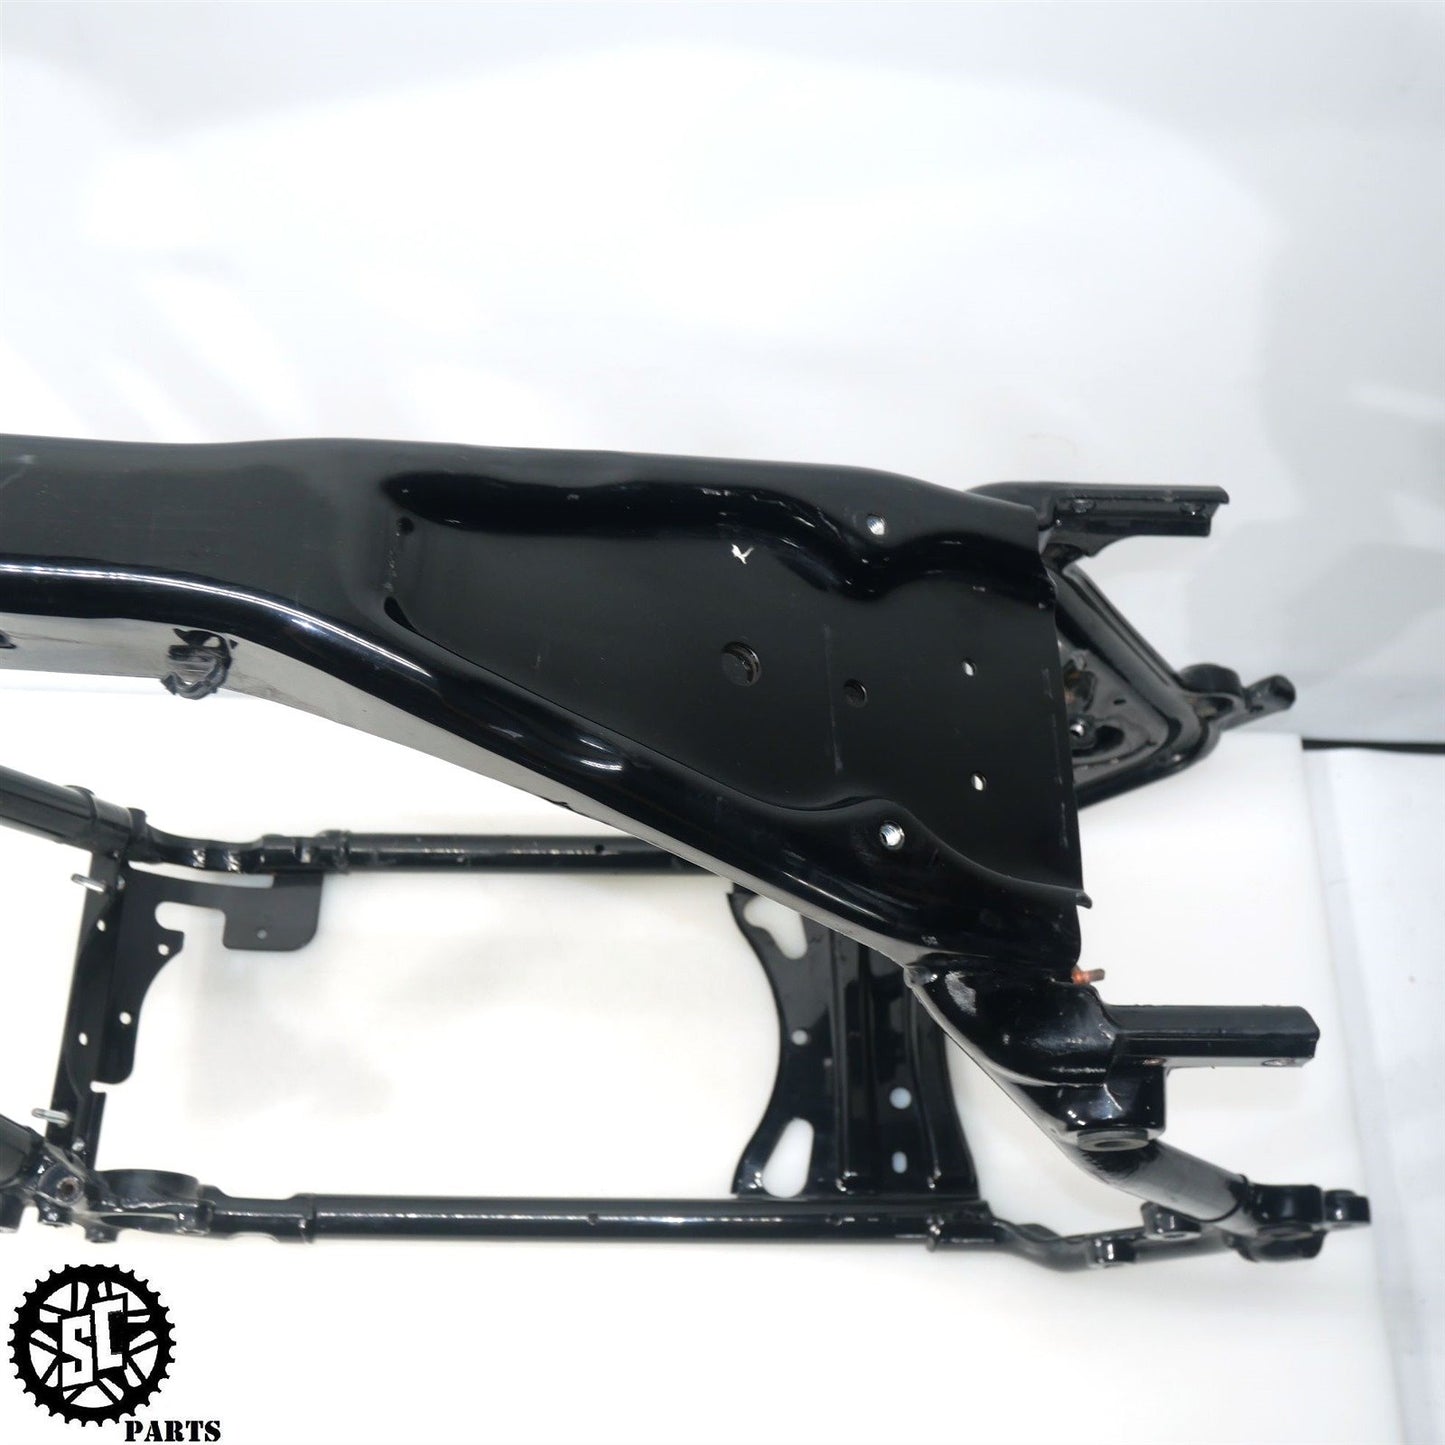 2015 HARLEY DAVIDSON ULTRA TOURING FRAME CHASSIS *S* HD45